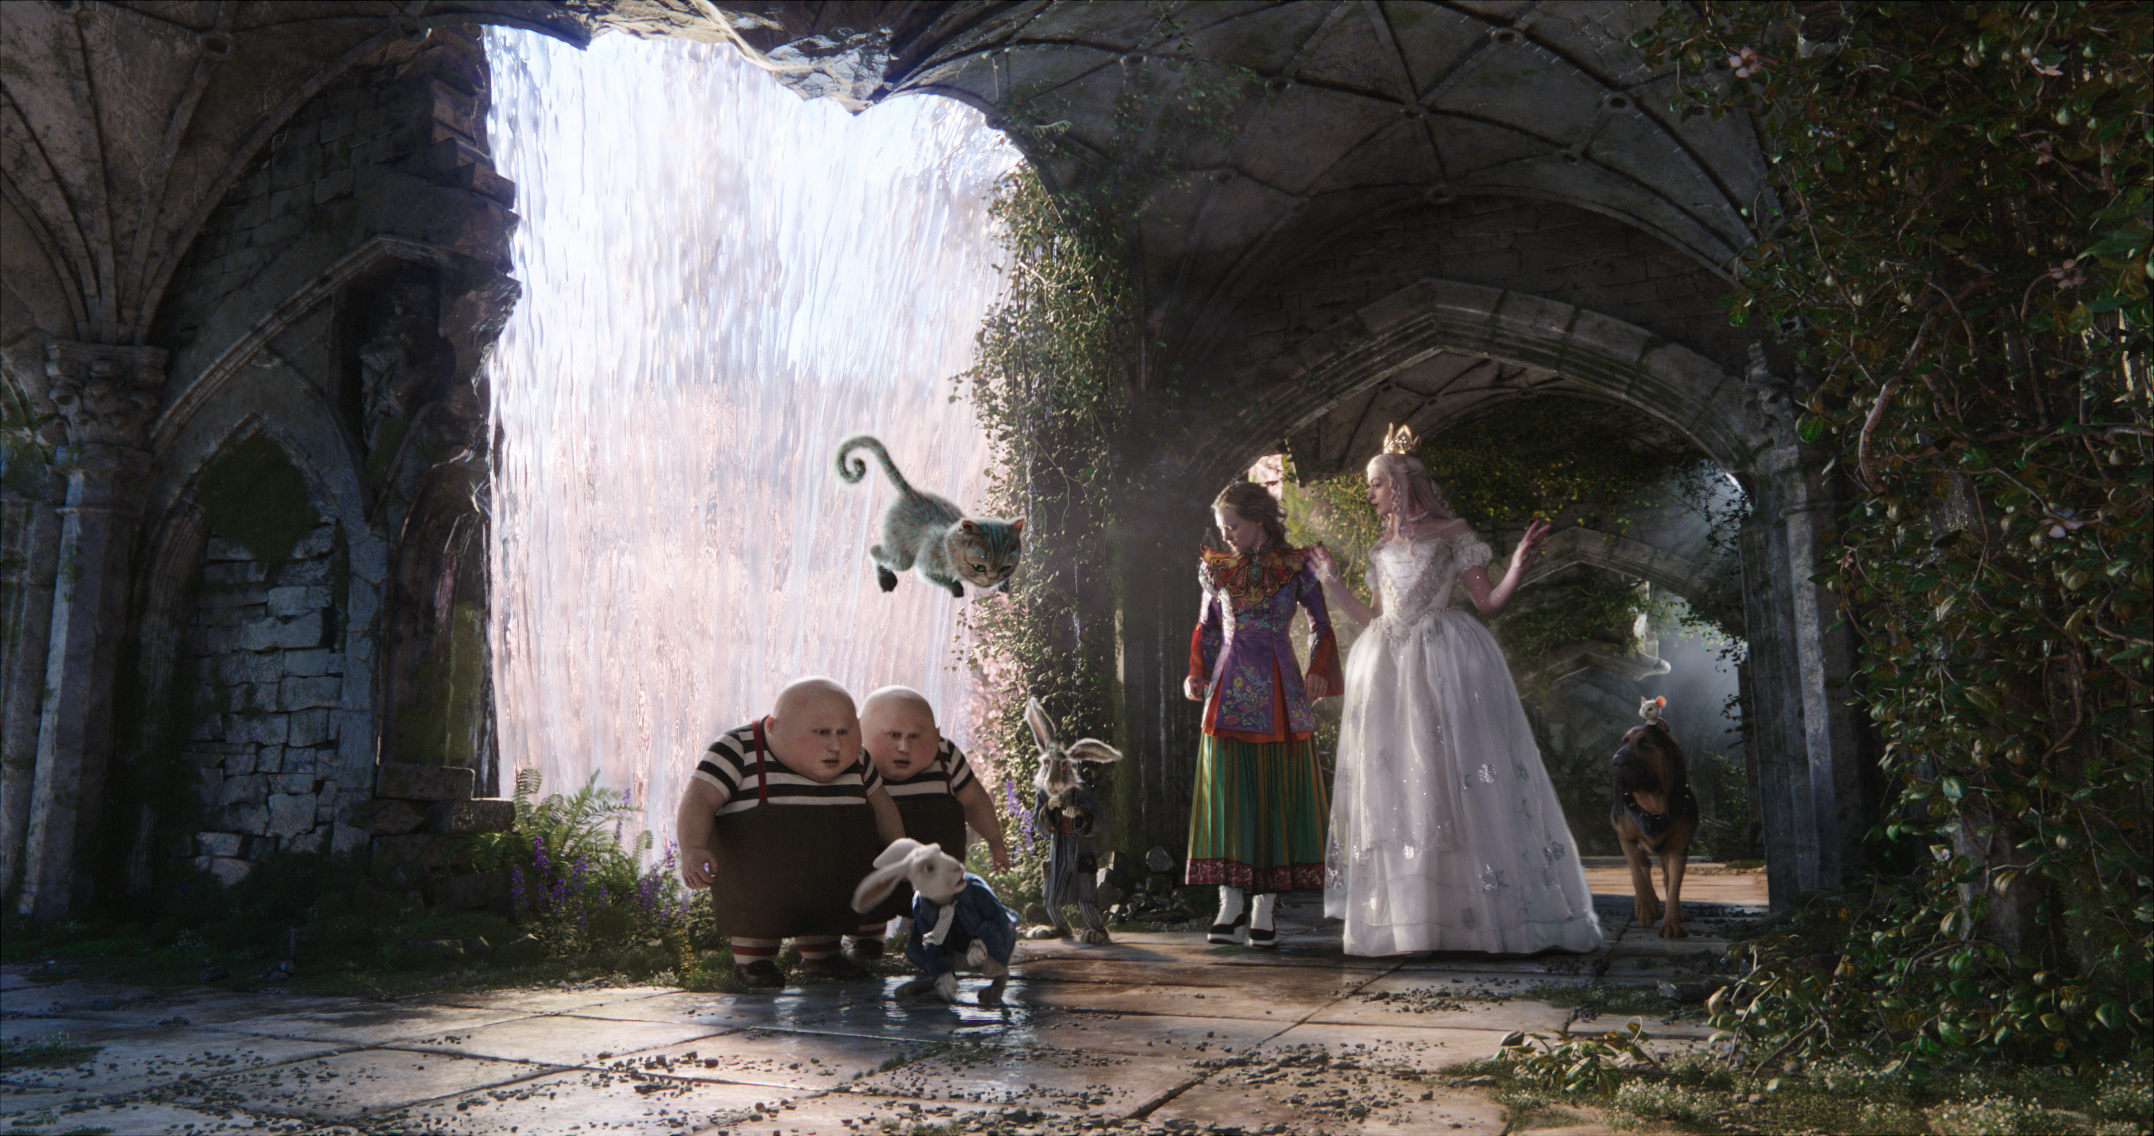 Alice (Mia Wasikowska) returns to the whimsical world of Underland in Disney's ALICE THROUGH THE LOOKING GLASS. In the all new adventure Anne Hathaway returns as the White Queen, Matt Lucas is the Tweedles, Stephen Fry is the voice of Chessur, Michael Sheen is the voice of the White Rabbit, Timothy Spall voices Bayard, Paul Whitehouse is the voice of the March Hare and Barbara Windsor is the voice of Dormouse.